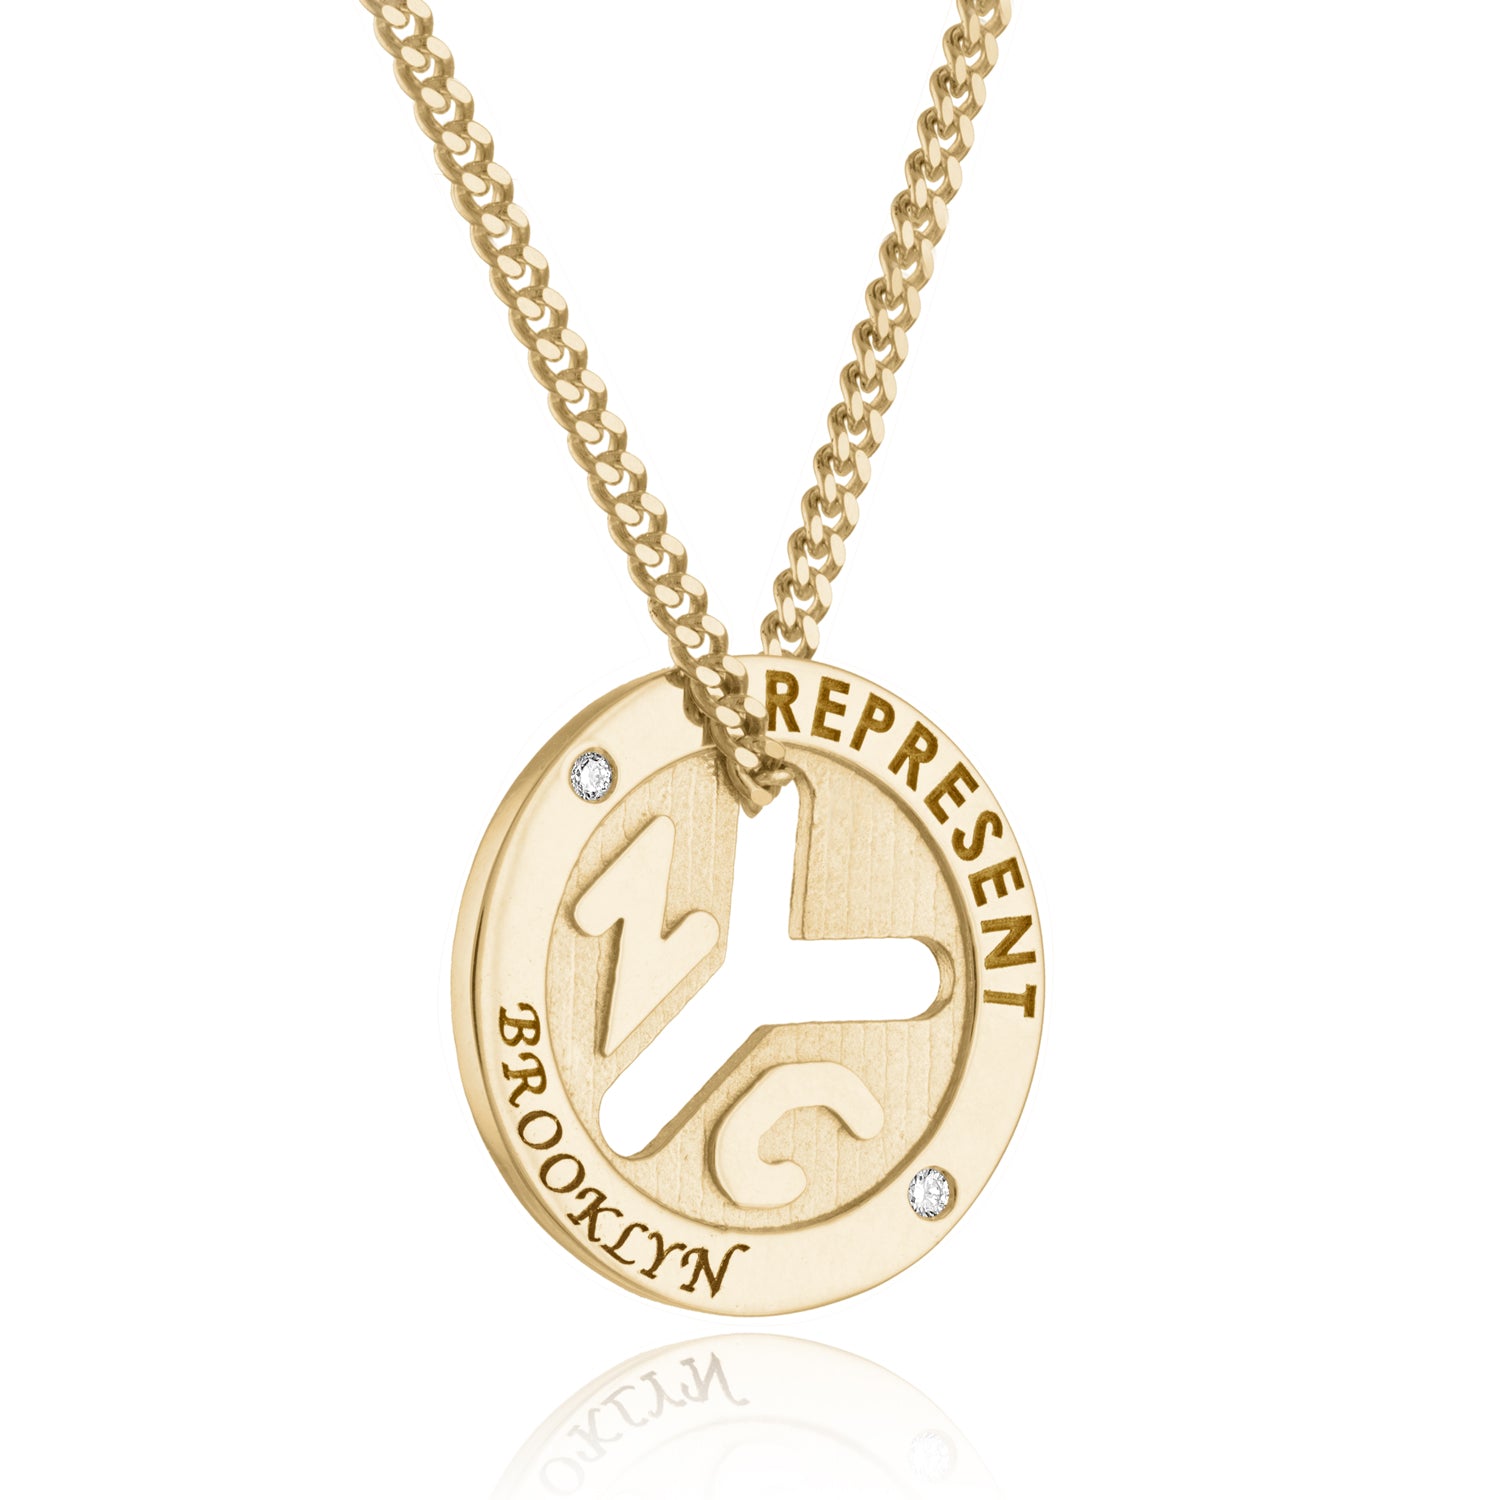 Subway Series Necklace - Lower East Side to Upper West Side 14K Yellow Gold